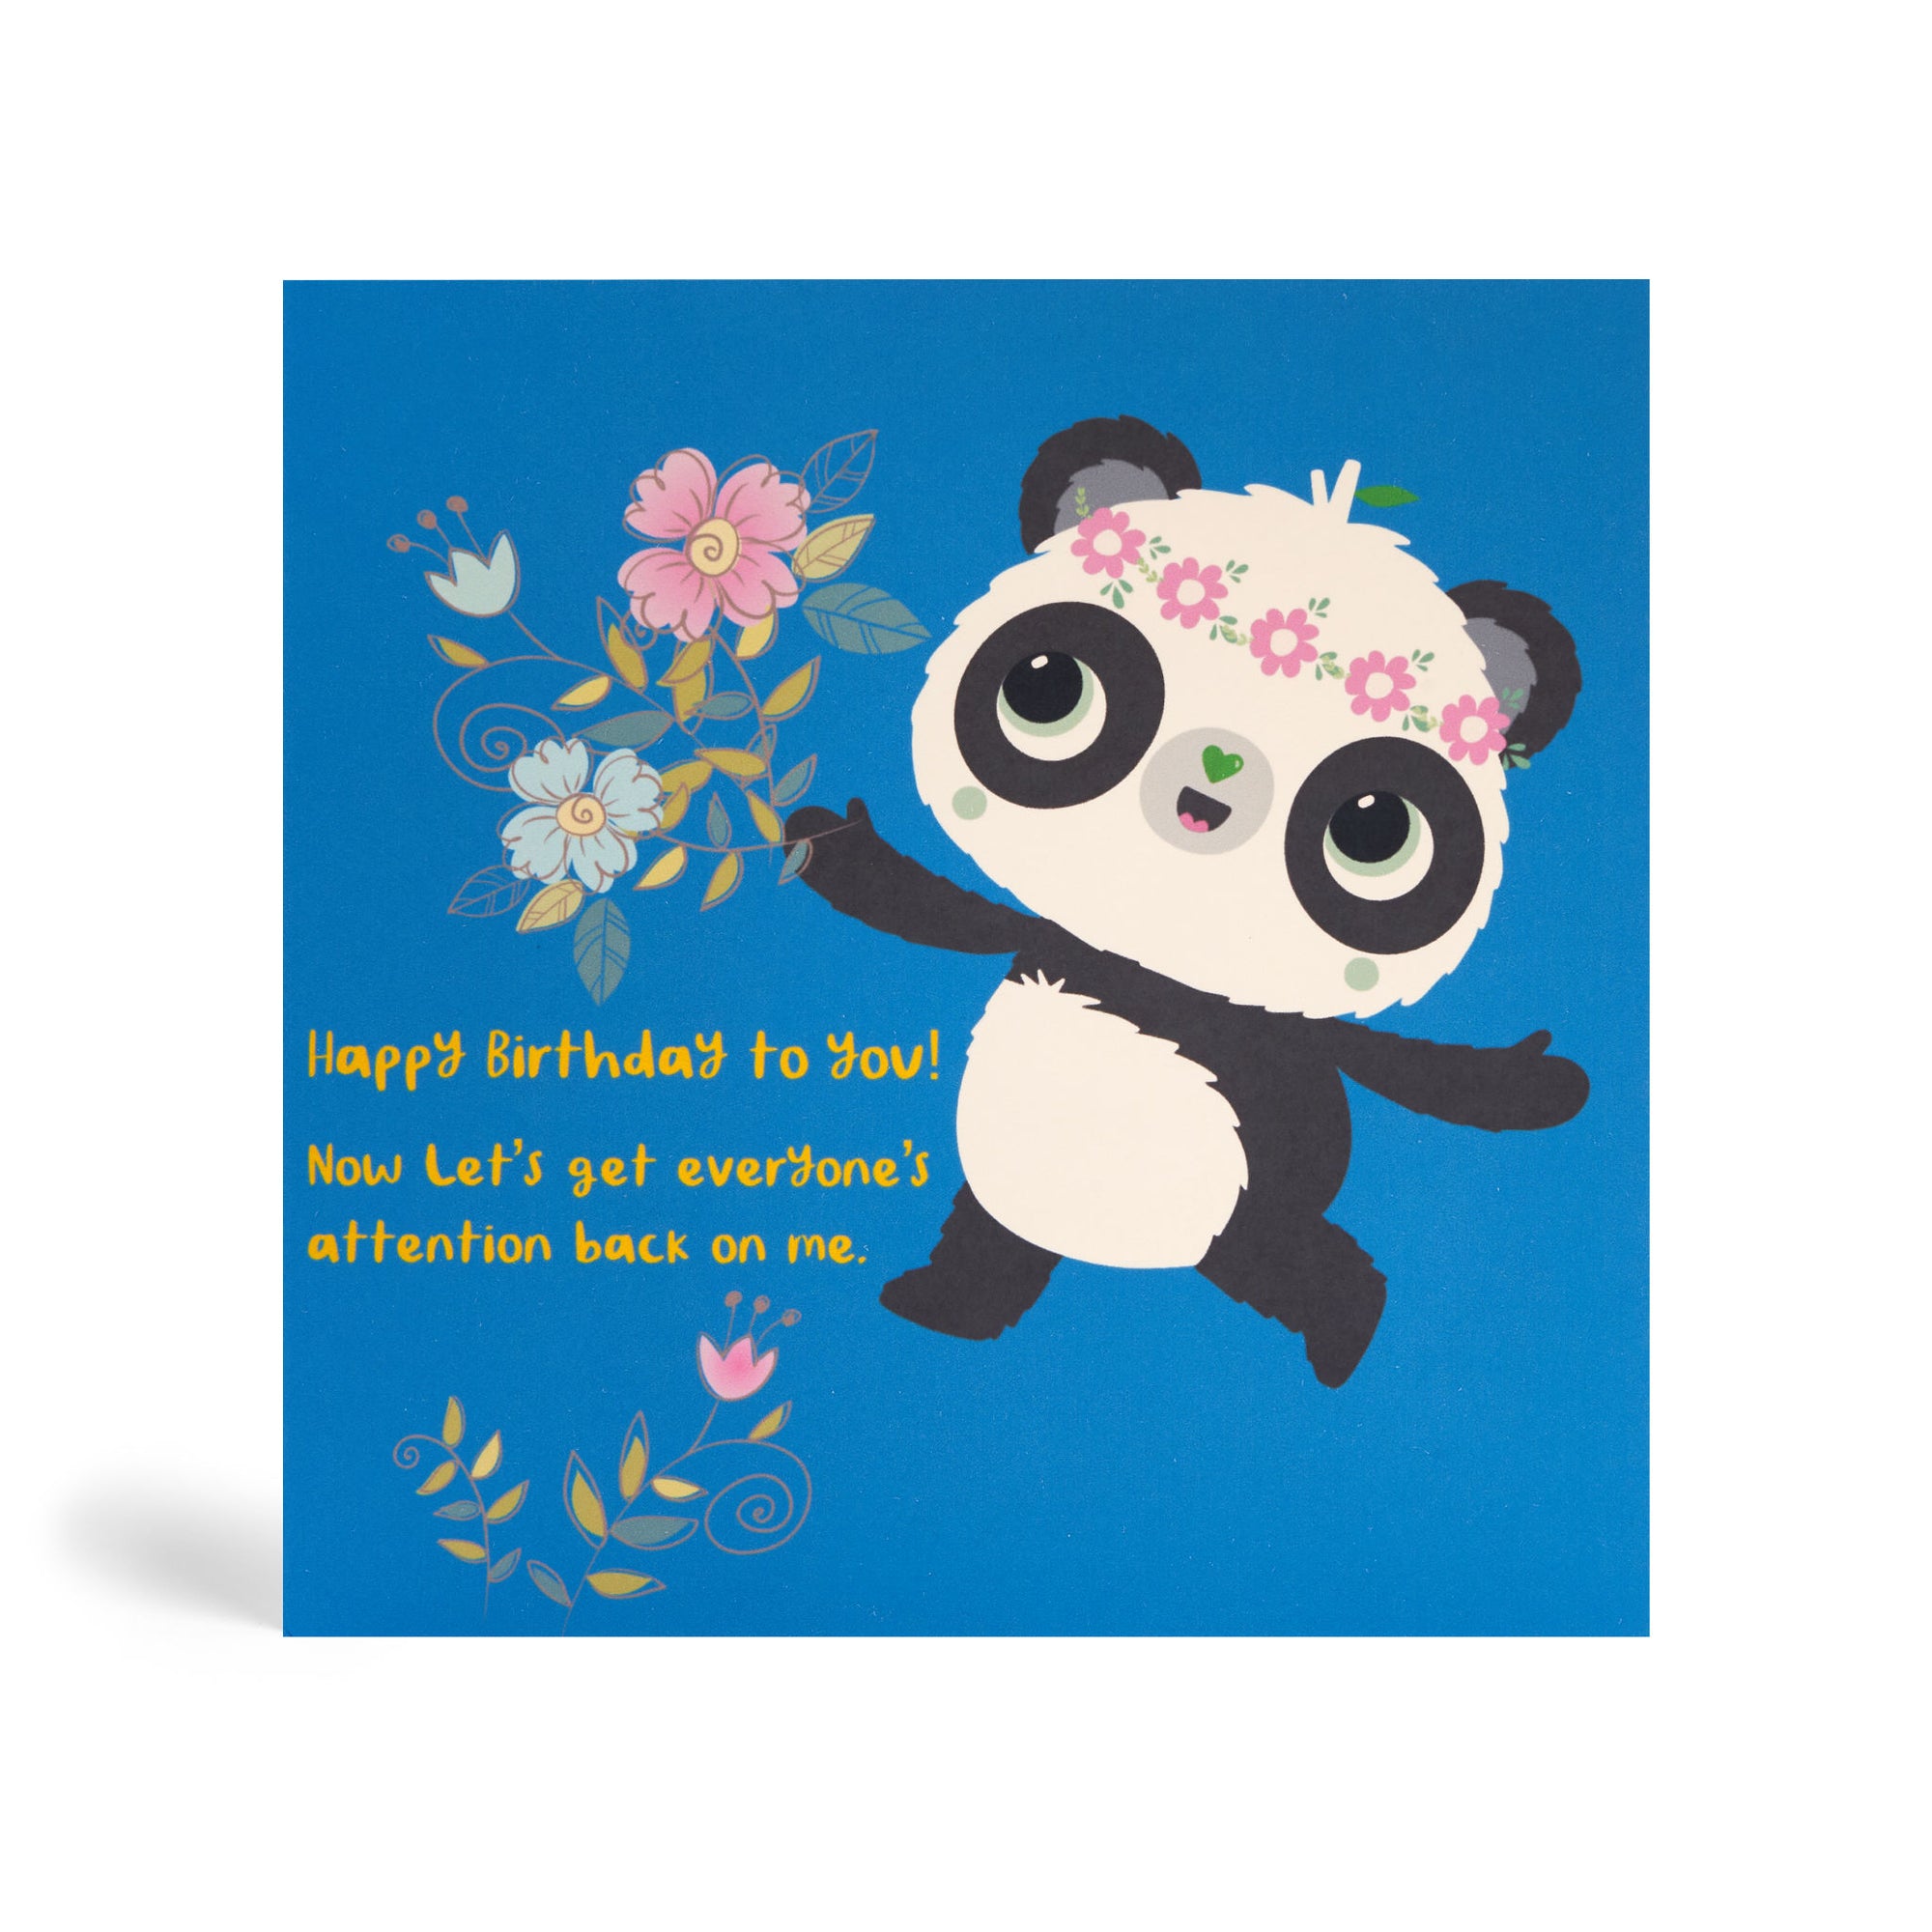 Blue 150mm square eco-friendly, tree free, Happy Birthday to you! Now let’s get everyone’s attention back on me greeting card with showing off with pink and blue flowers. Good for the environment.